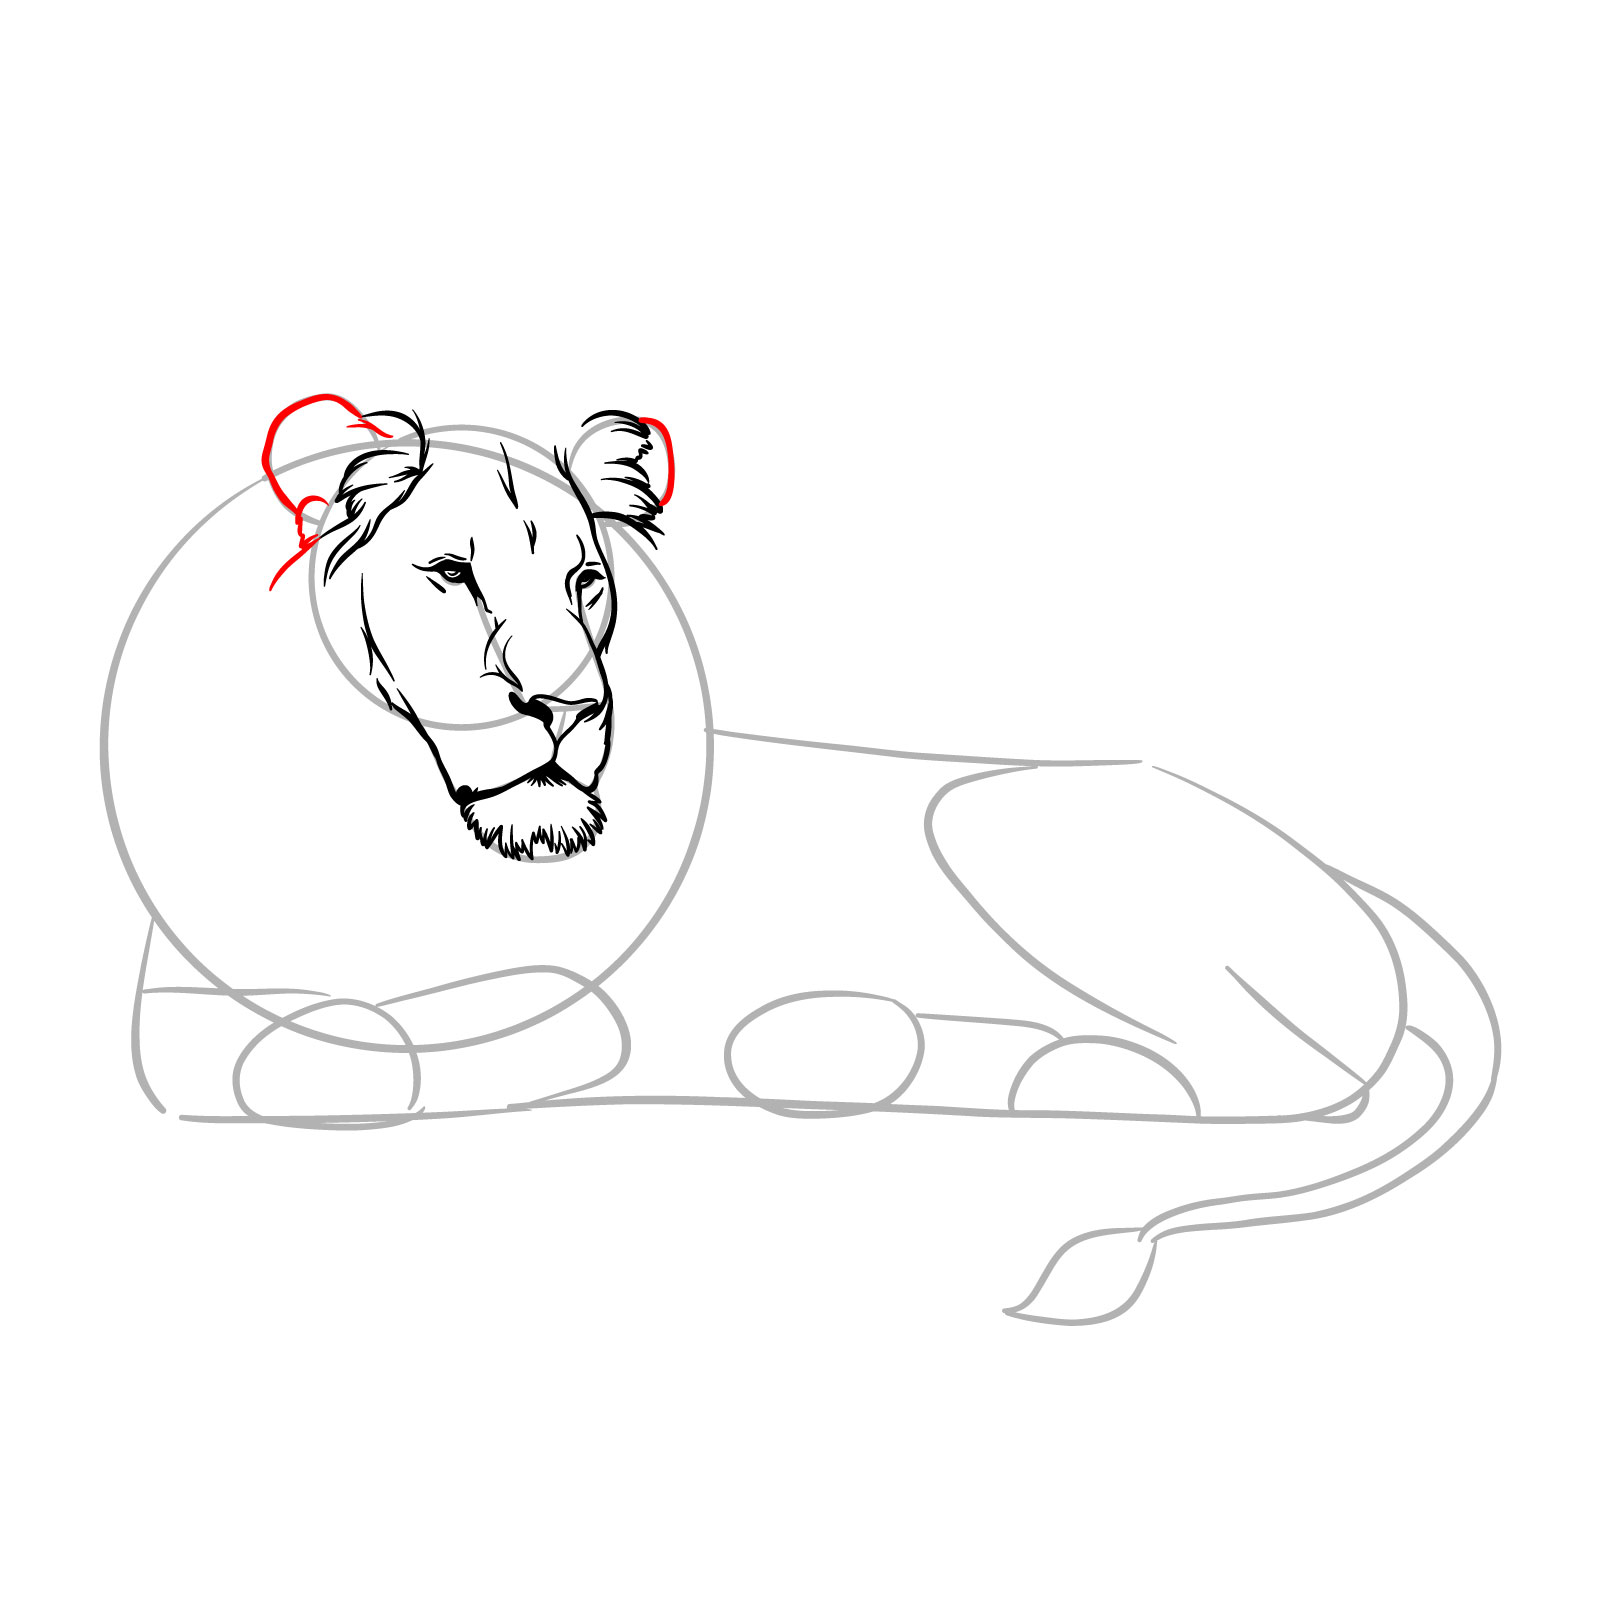 How to draw a lying lion in side view - Step 7: Outlining the ears